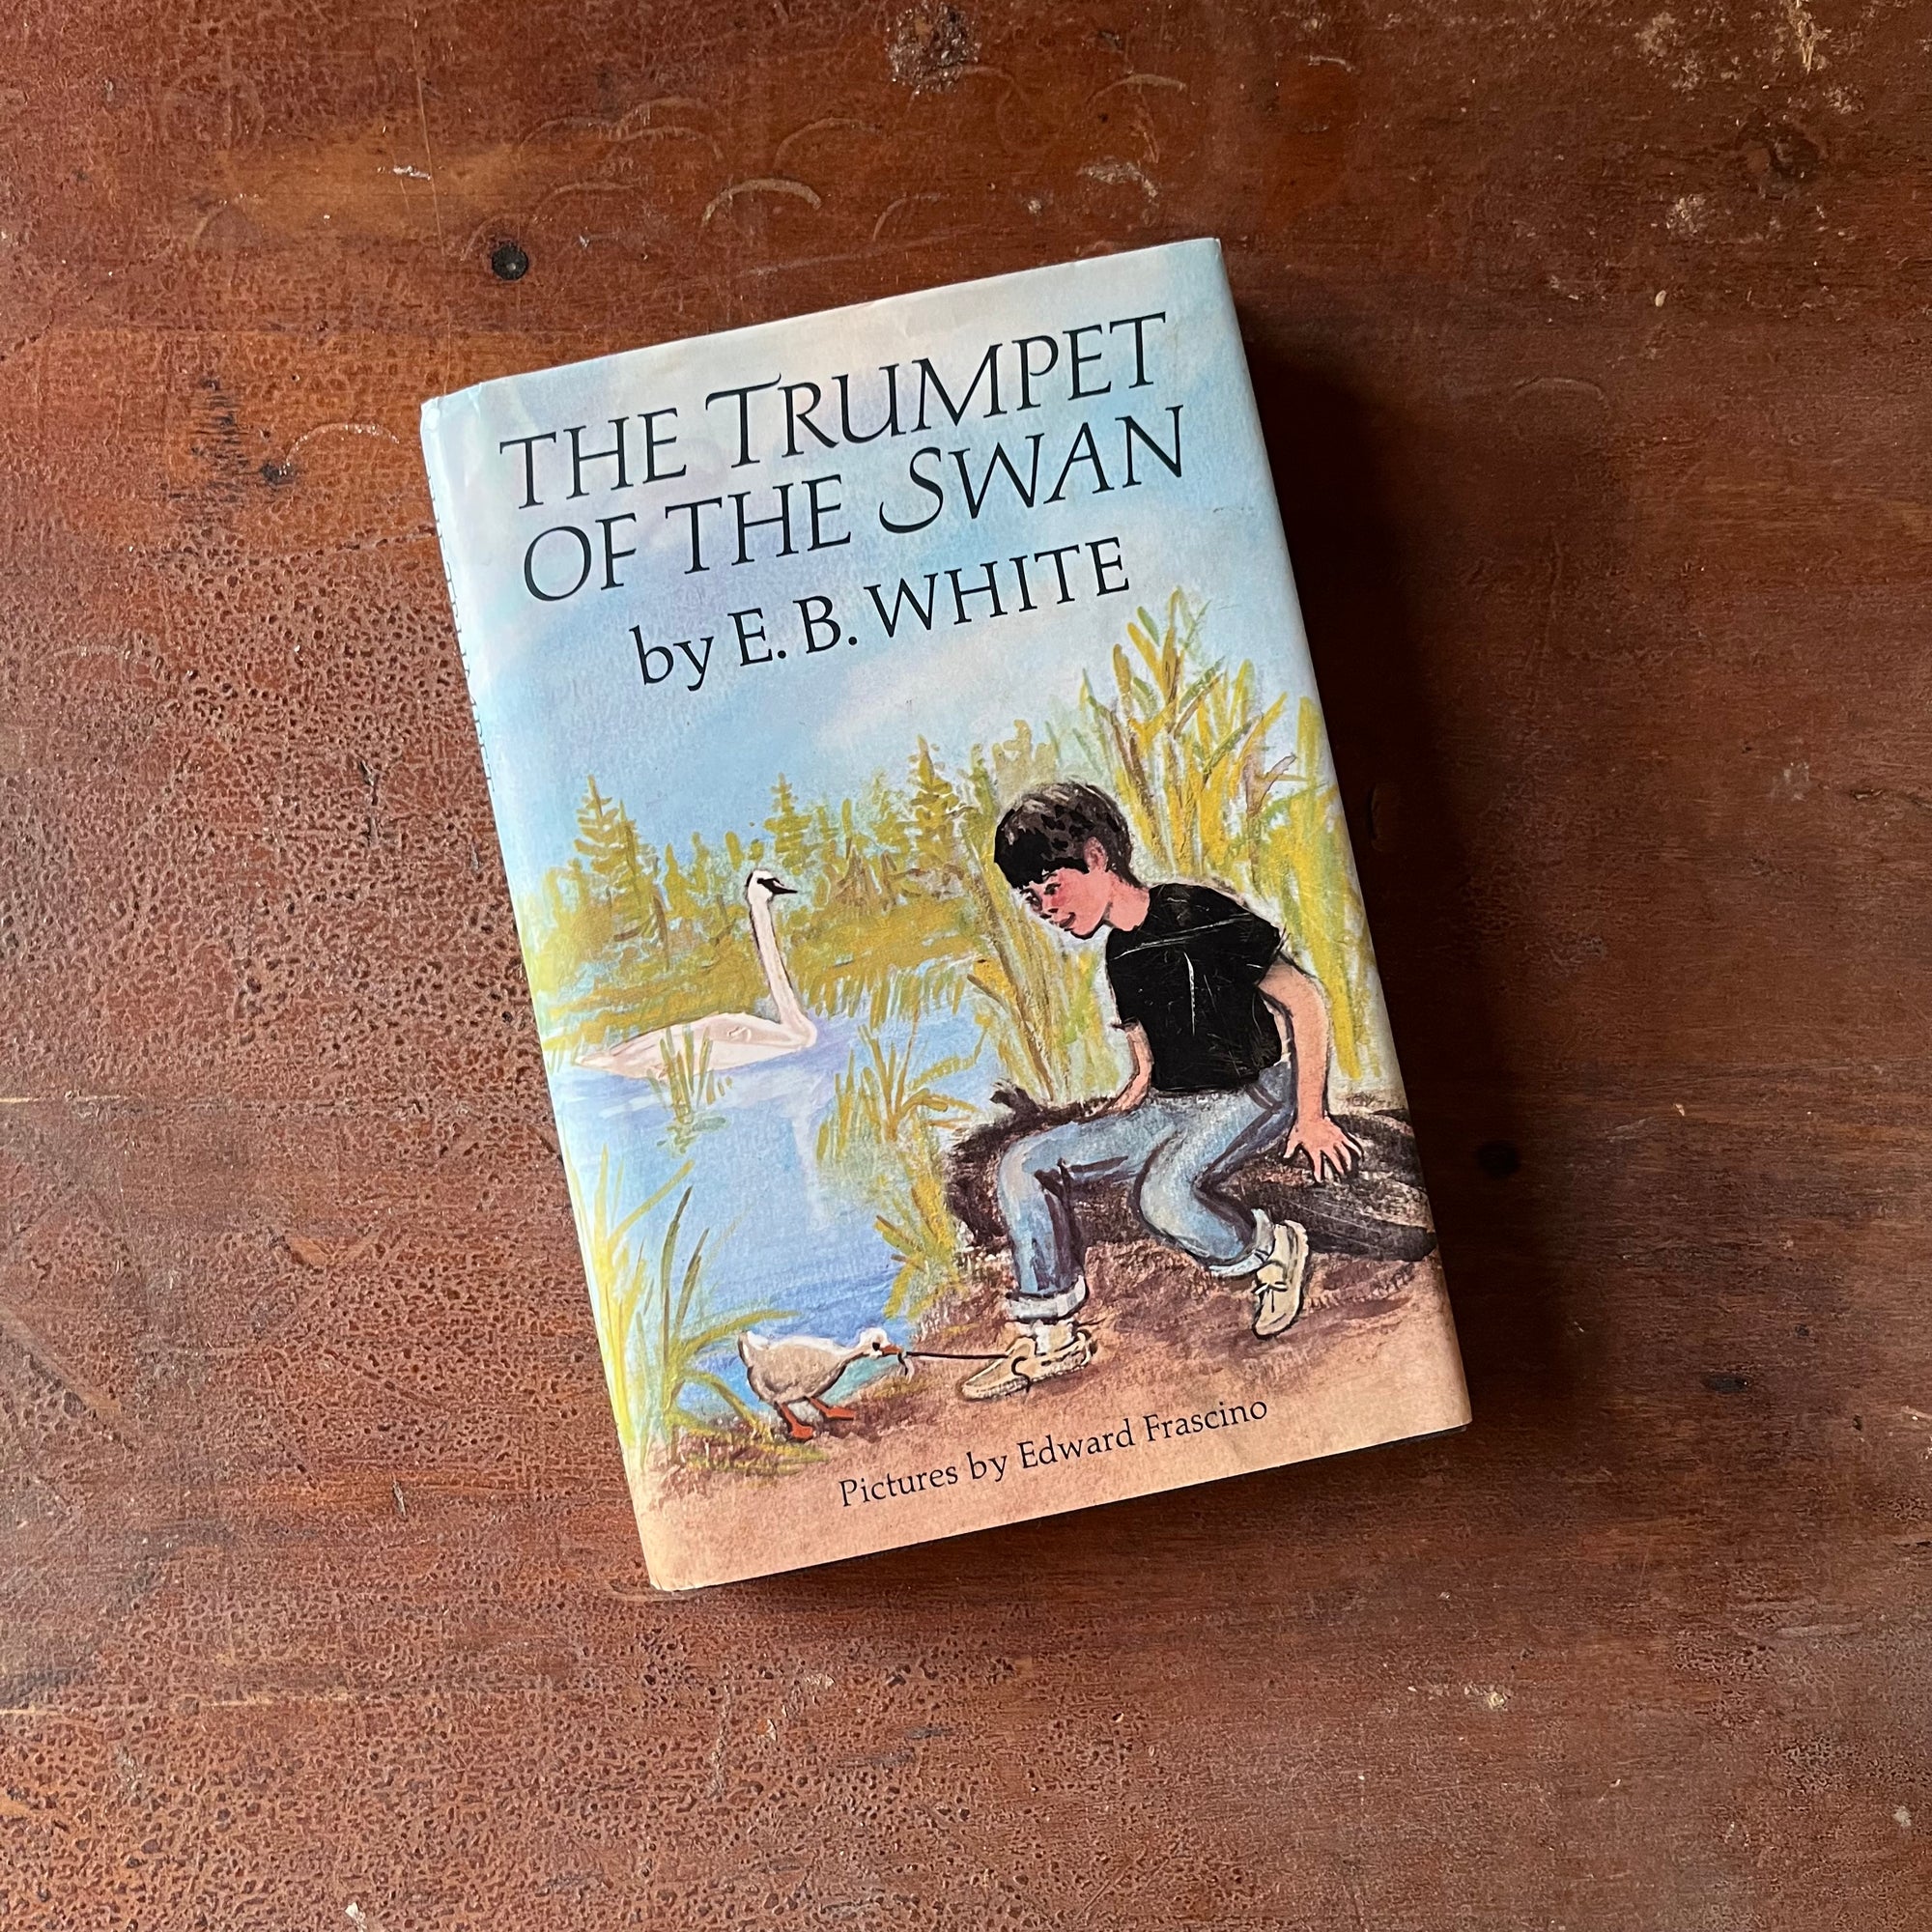 The Trumpet of the Swan by E. B. White with Illustrations by Edward Frascino - view of the dust jacket's front cover